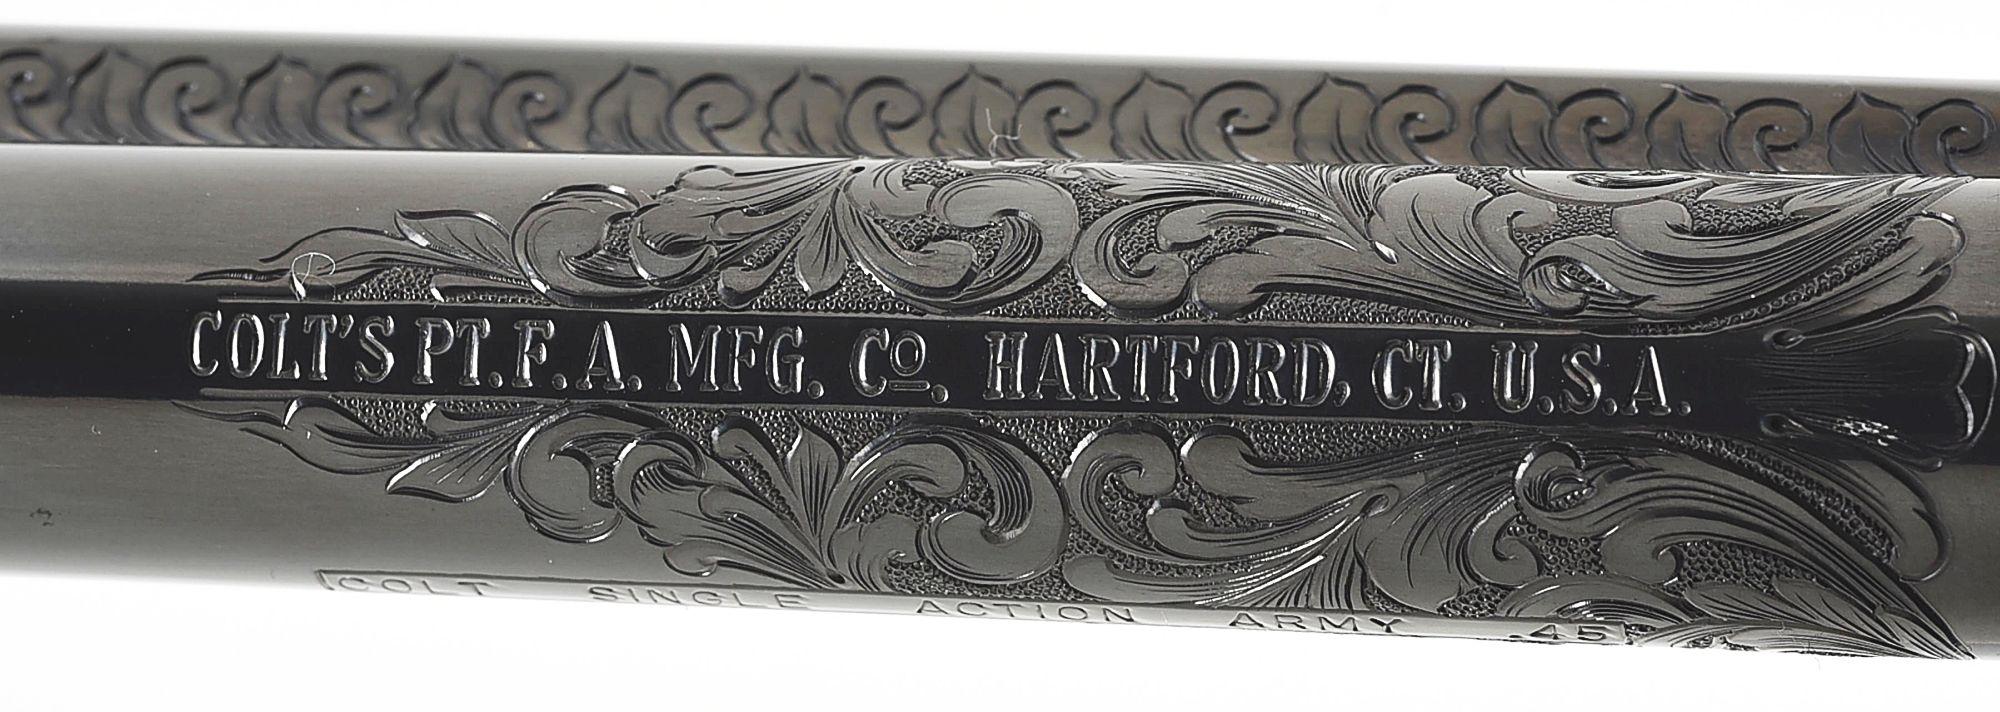 (M) FACTORY ENGRAVED 3RD GENERATION COLT SINGLE ACTION ARMY REVOLVER.